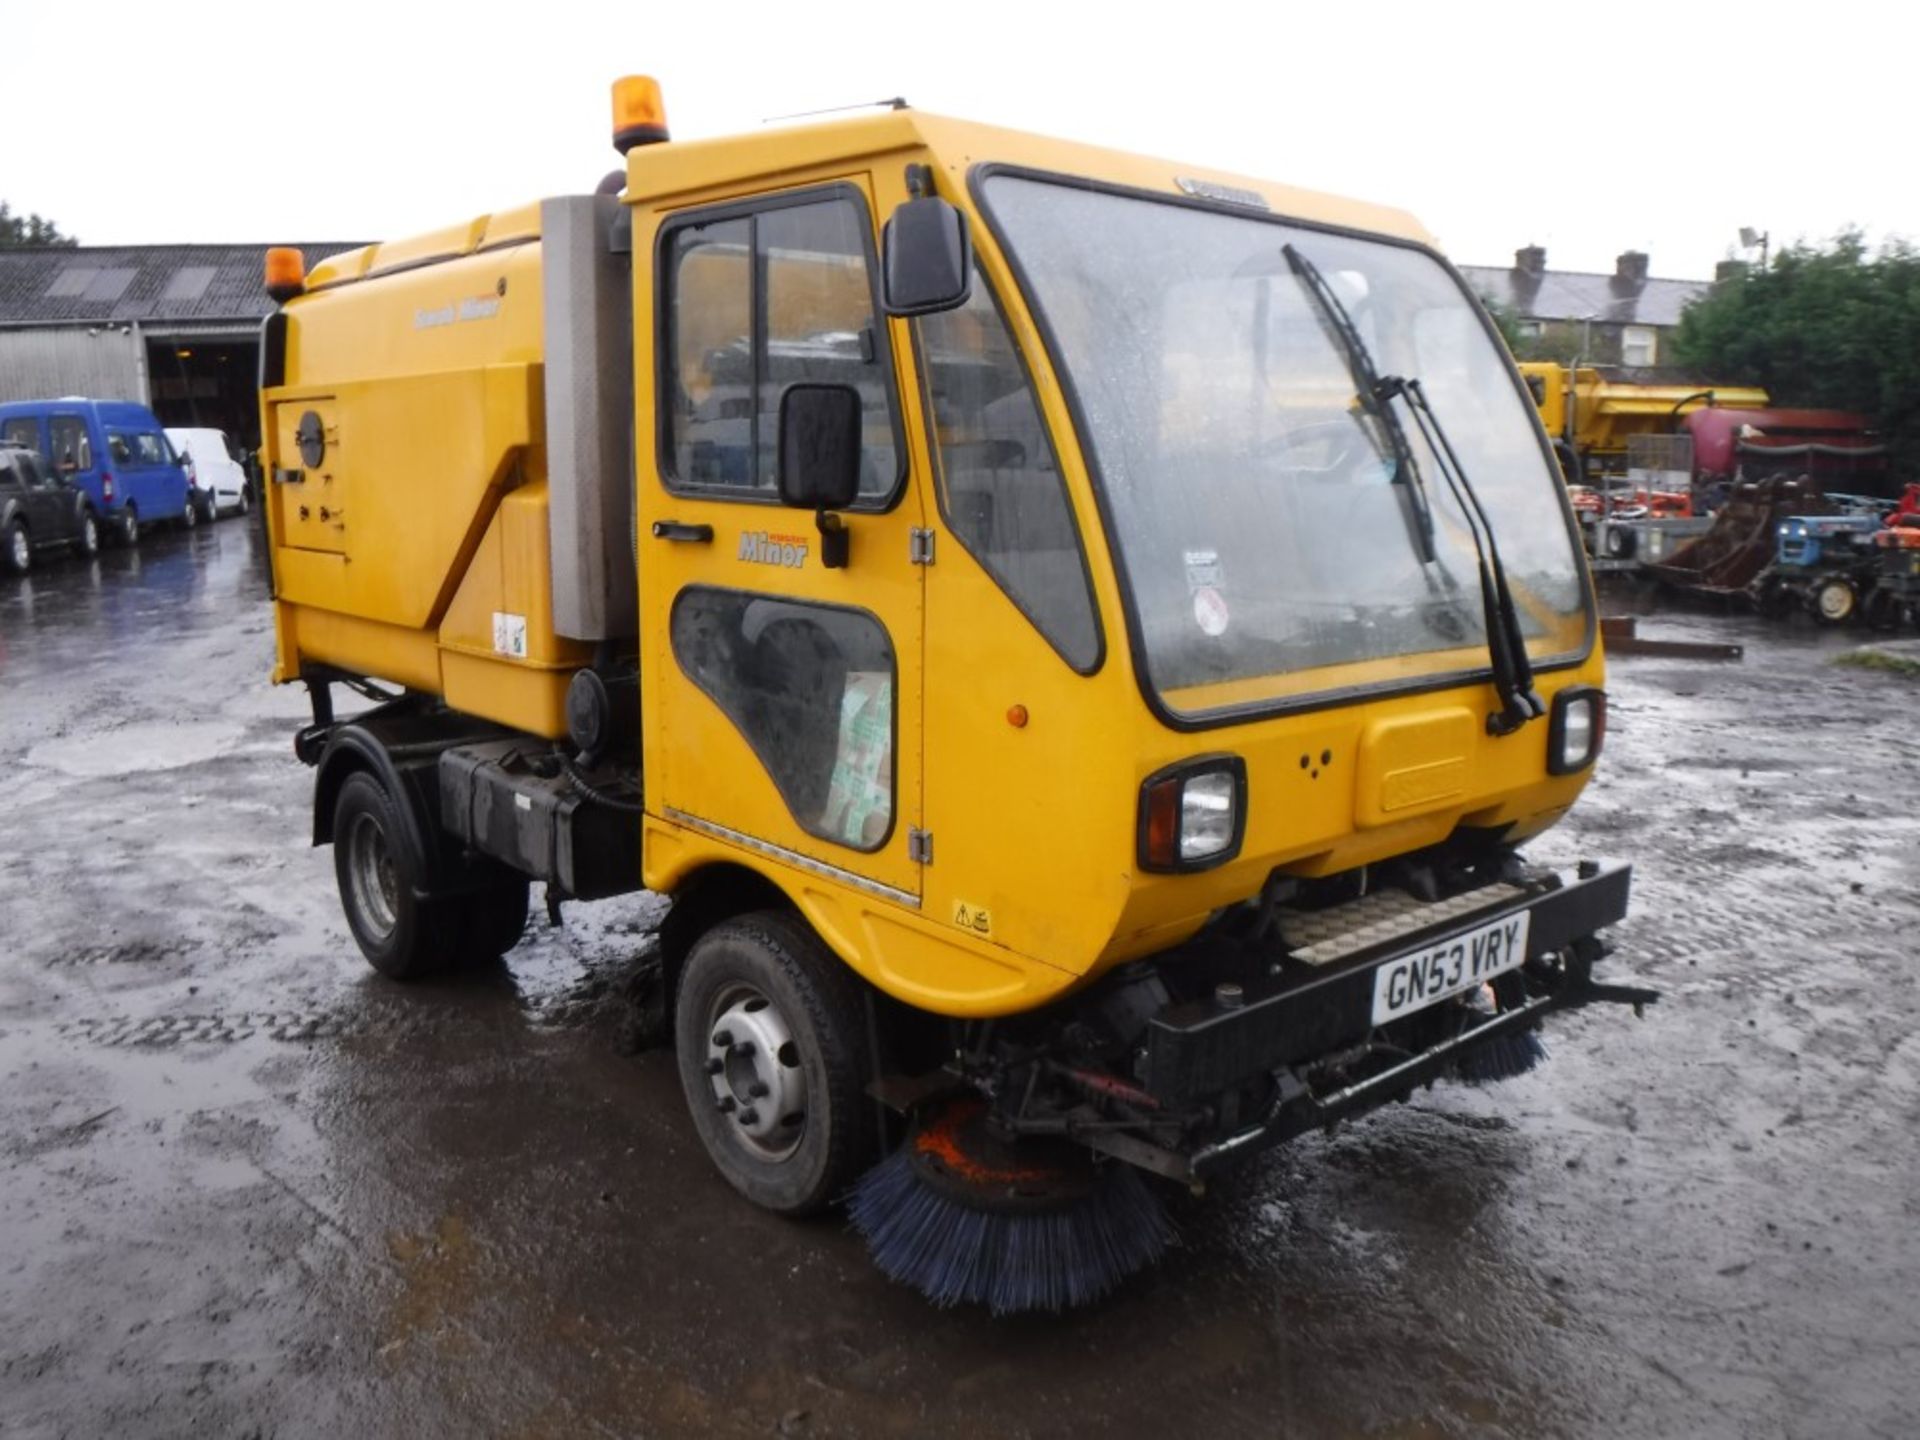 03 reg SCARAB 3.5 SWEEPER, 1ST REG 11/03, 2955 HOURS NOT WARRANTED, V5 HERE, 1 OWNER FROM NEW [ - Image 2 of 5